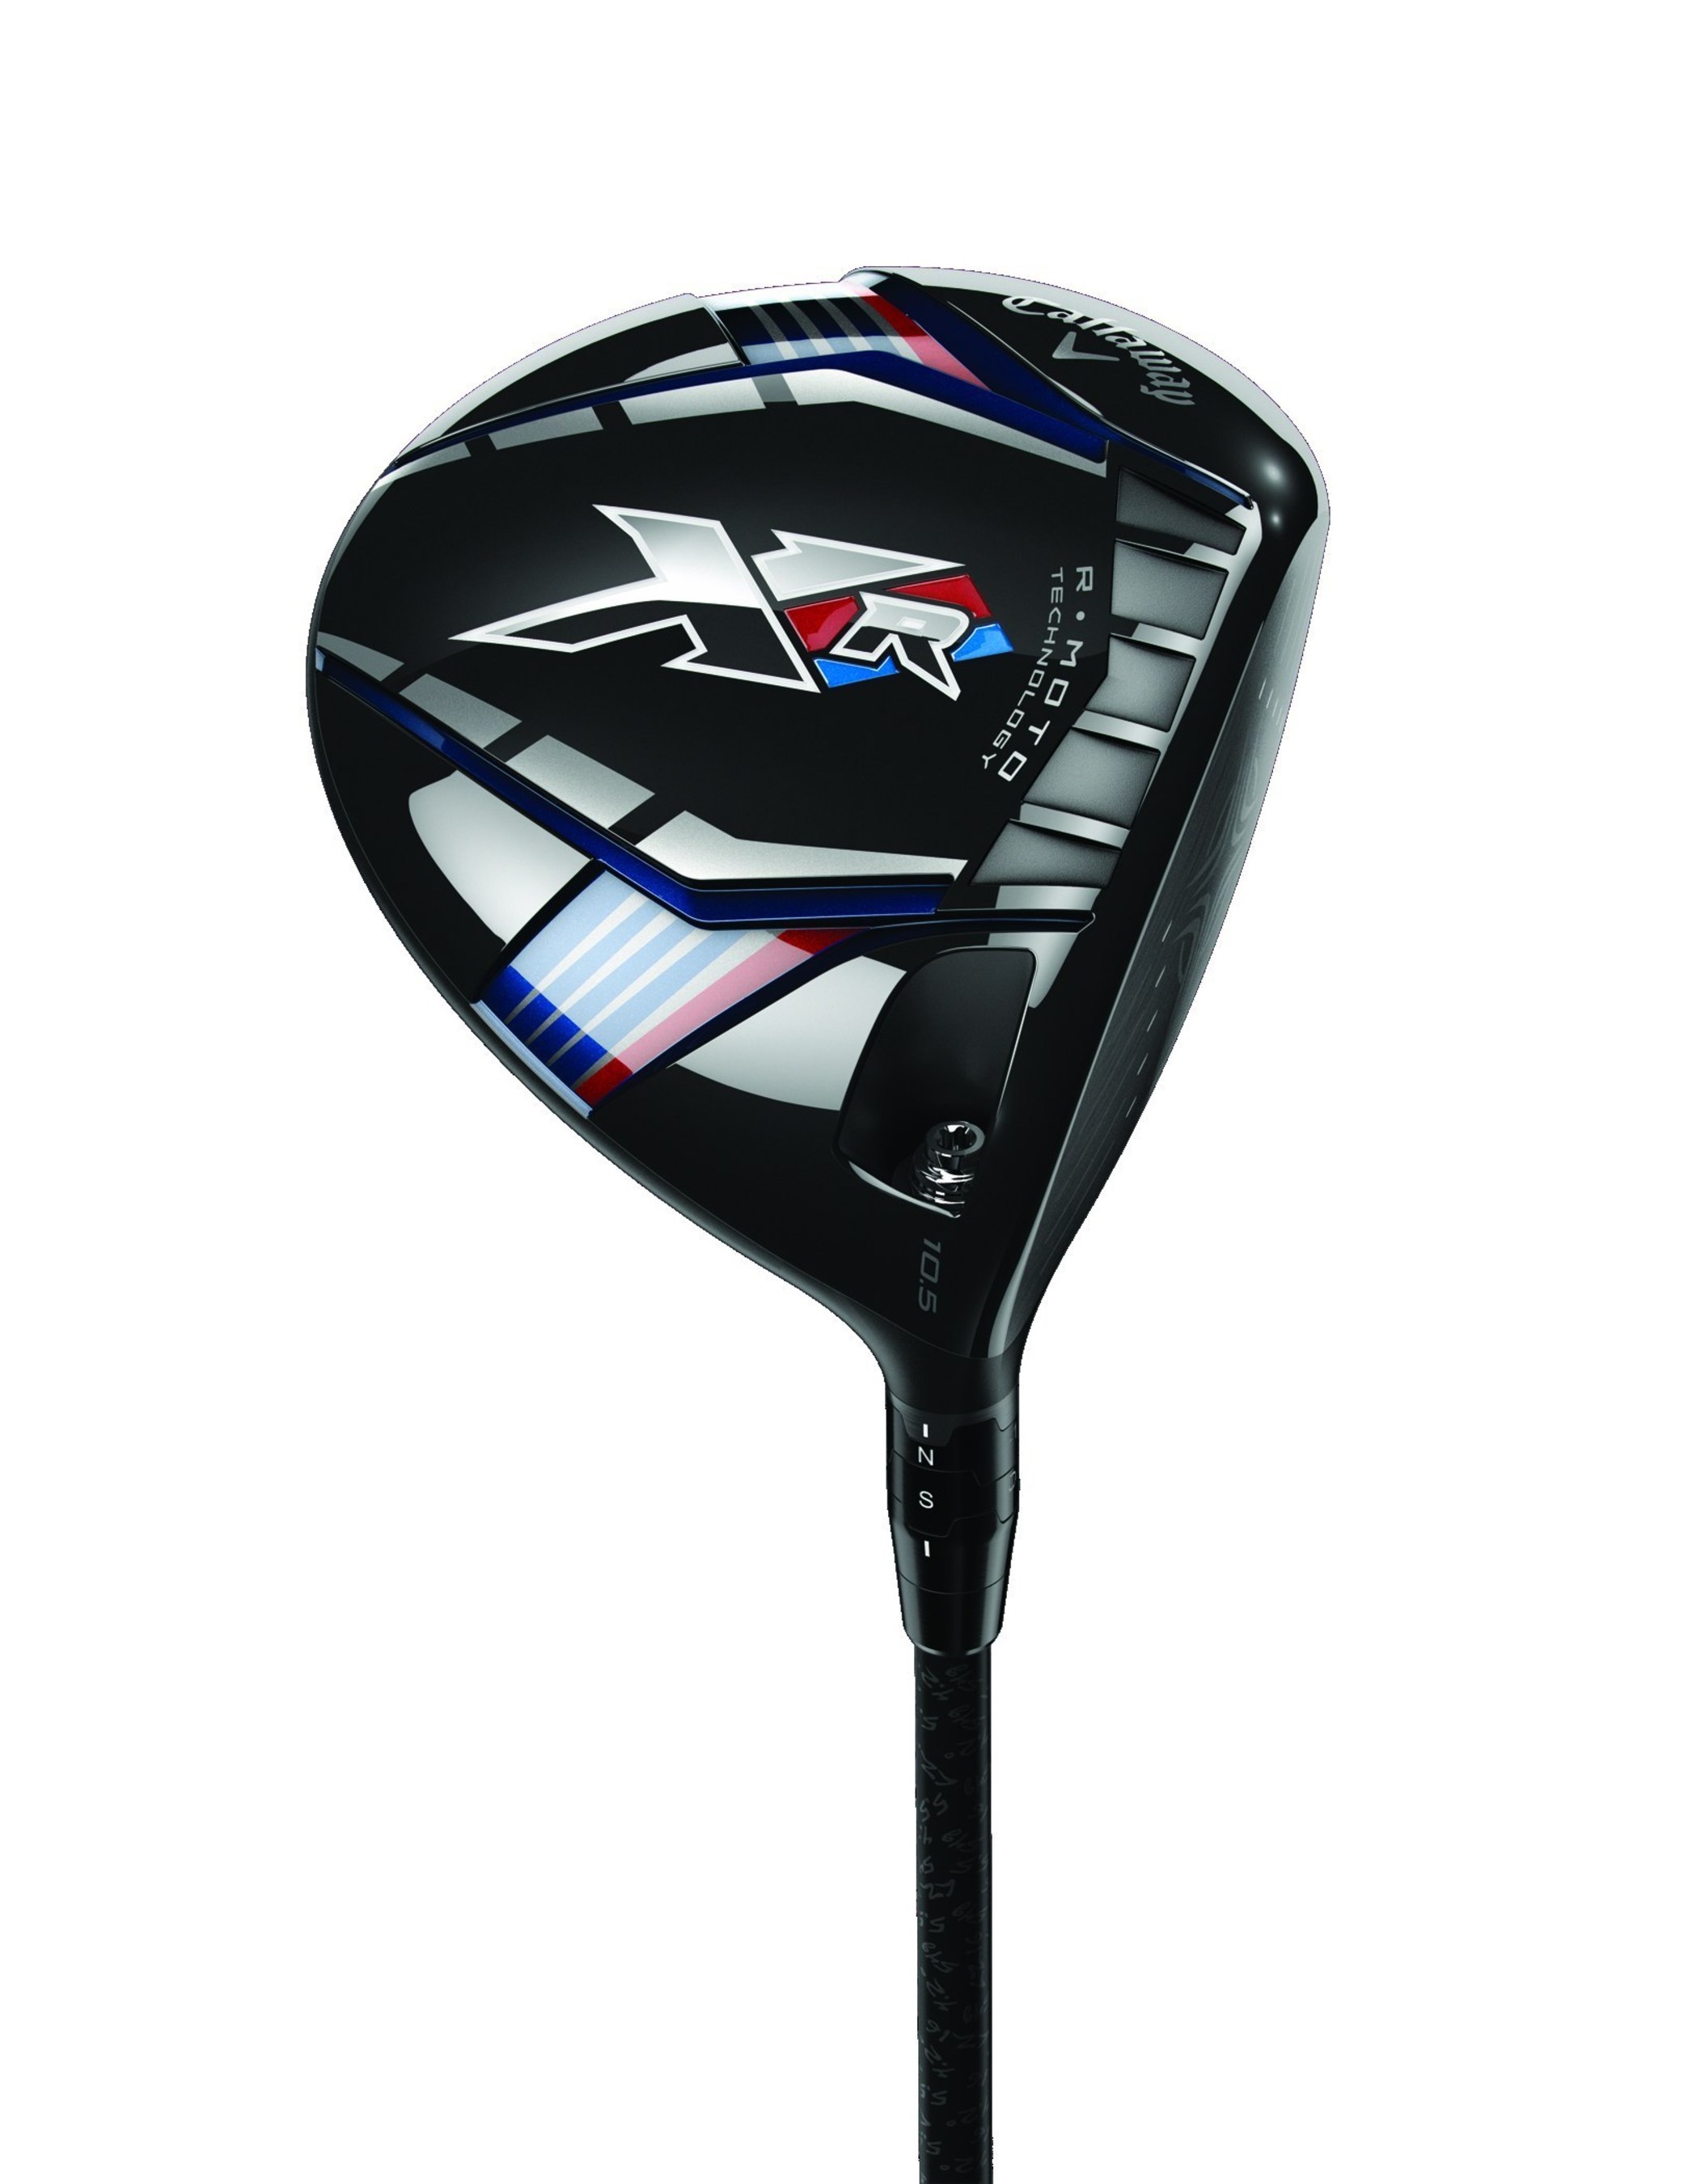 CALLAWAY GOLF'S PRODUCT LINE AWARDED MOST GOLD MEDALS IN 2015 GOLF DIGEST HOT LIST. The Company's Big Bertha, XR and Odyssey Works Products Stand Out in the Annual Equipment Evaluation.